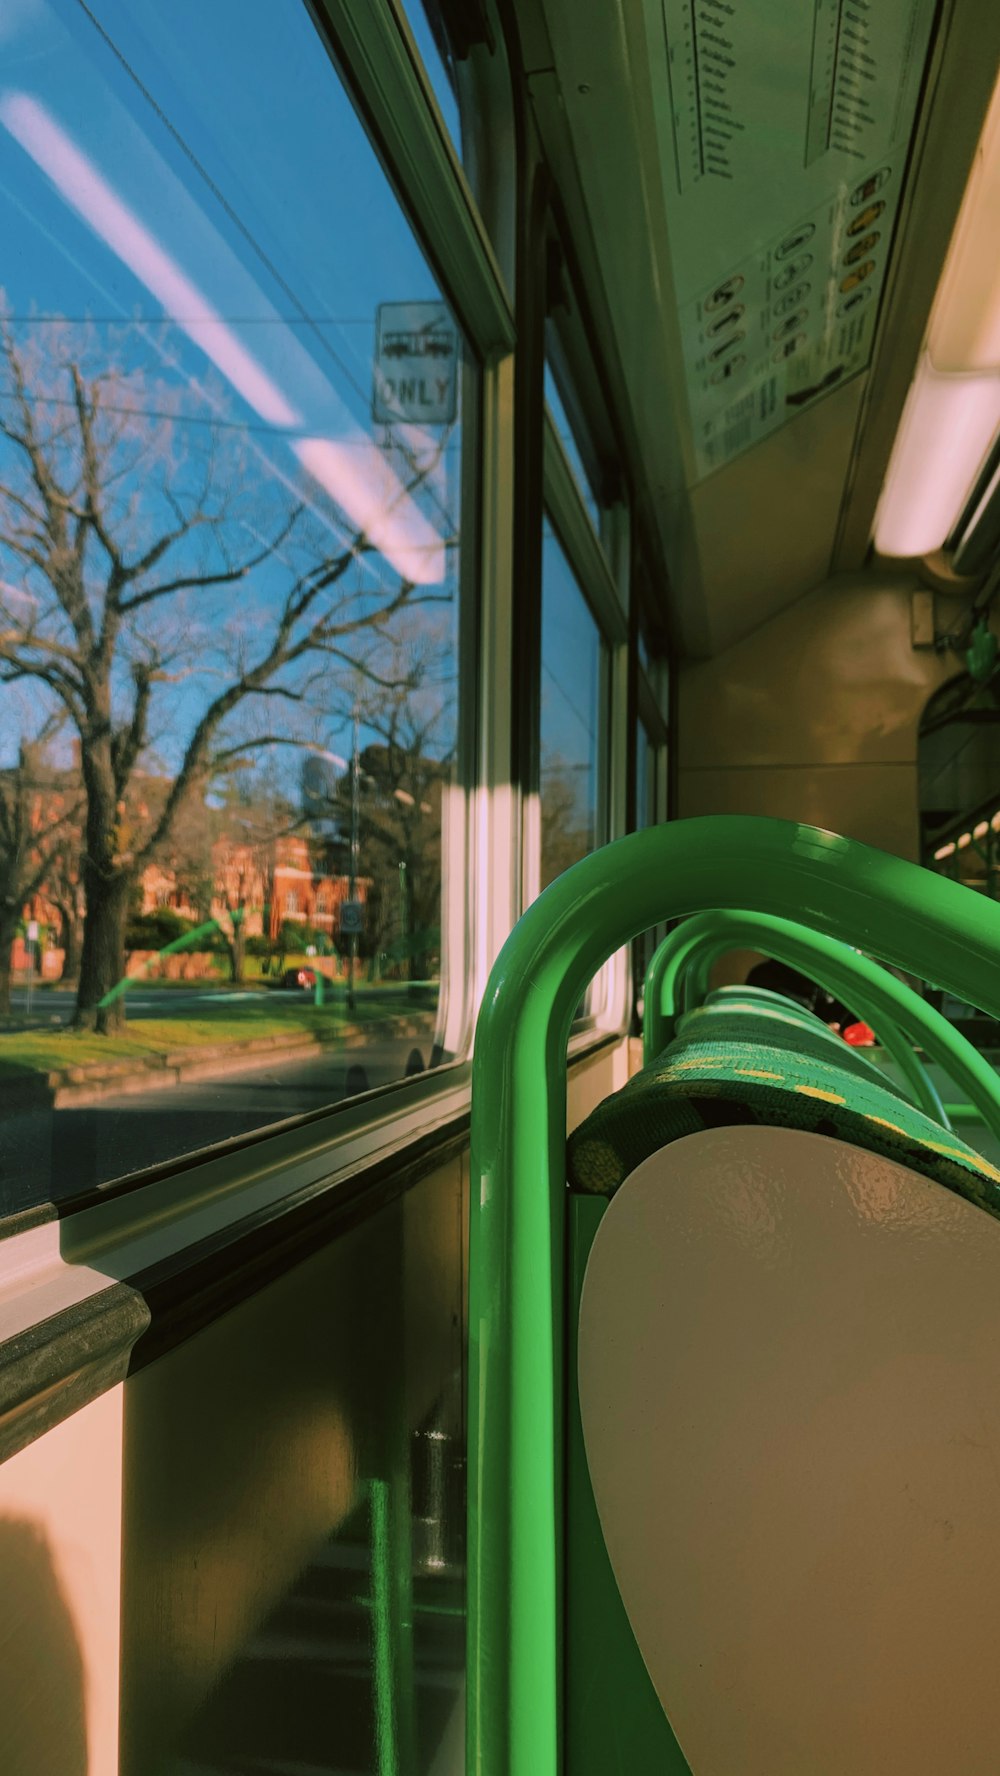 green and white bus interior